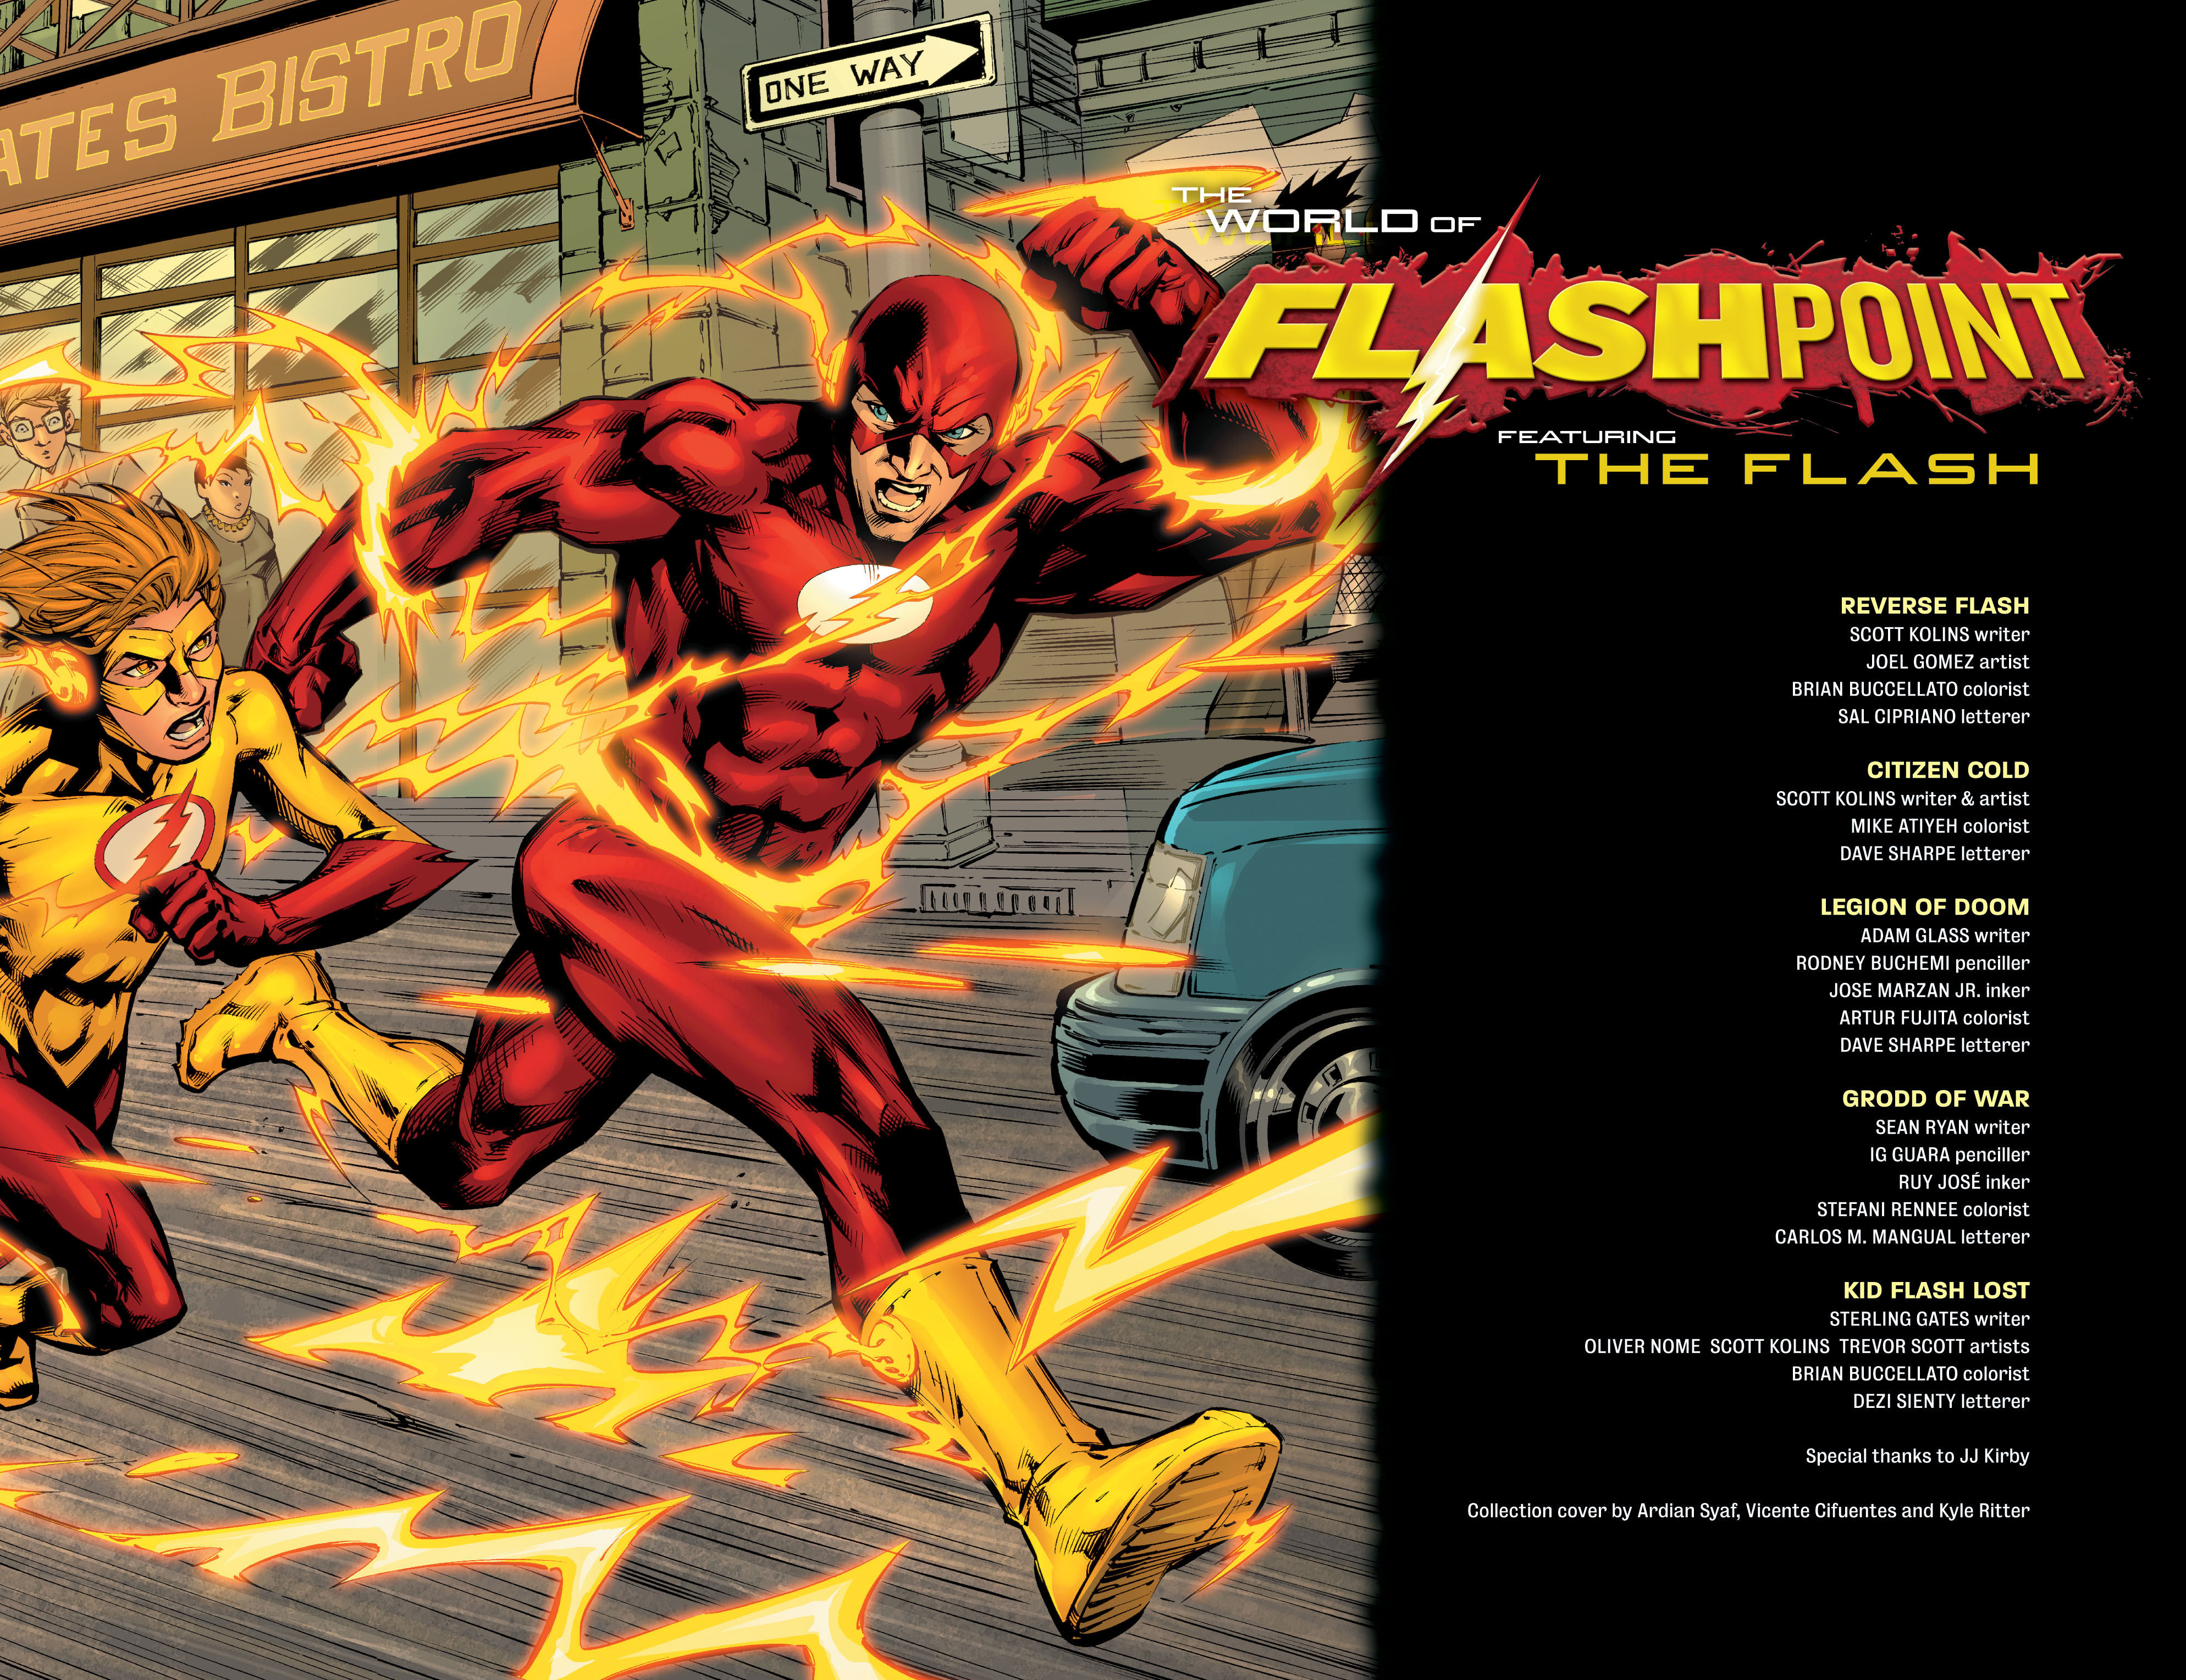 Flashpoint The World Of Flashpoint Featuring The Flash Tpb